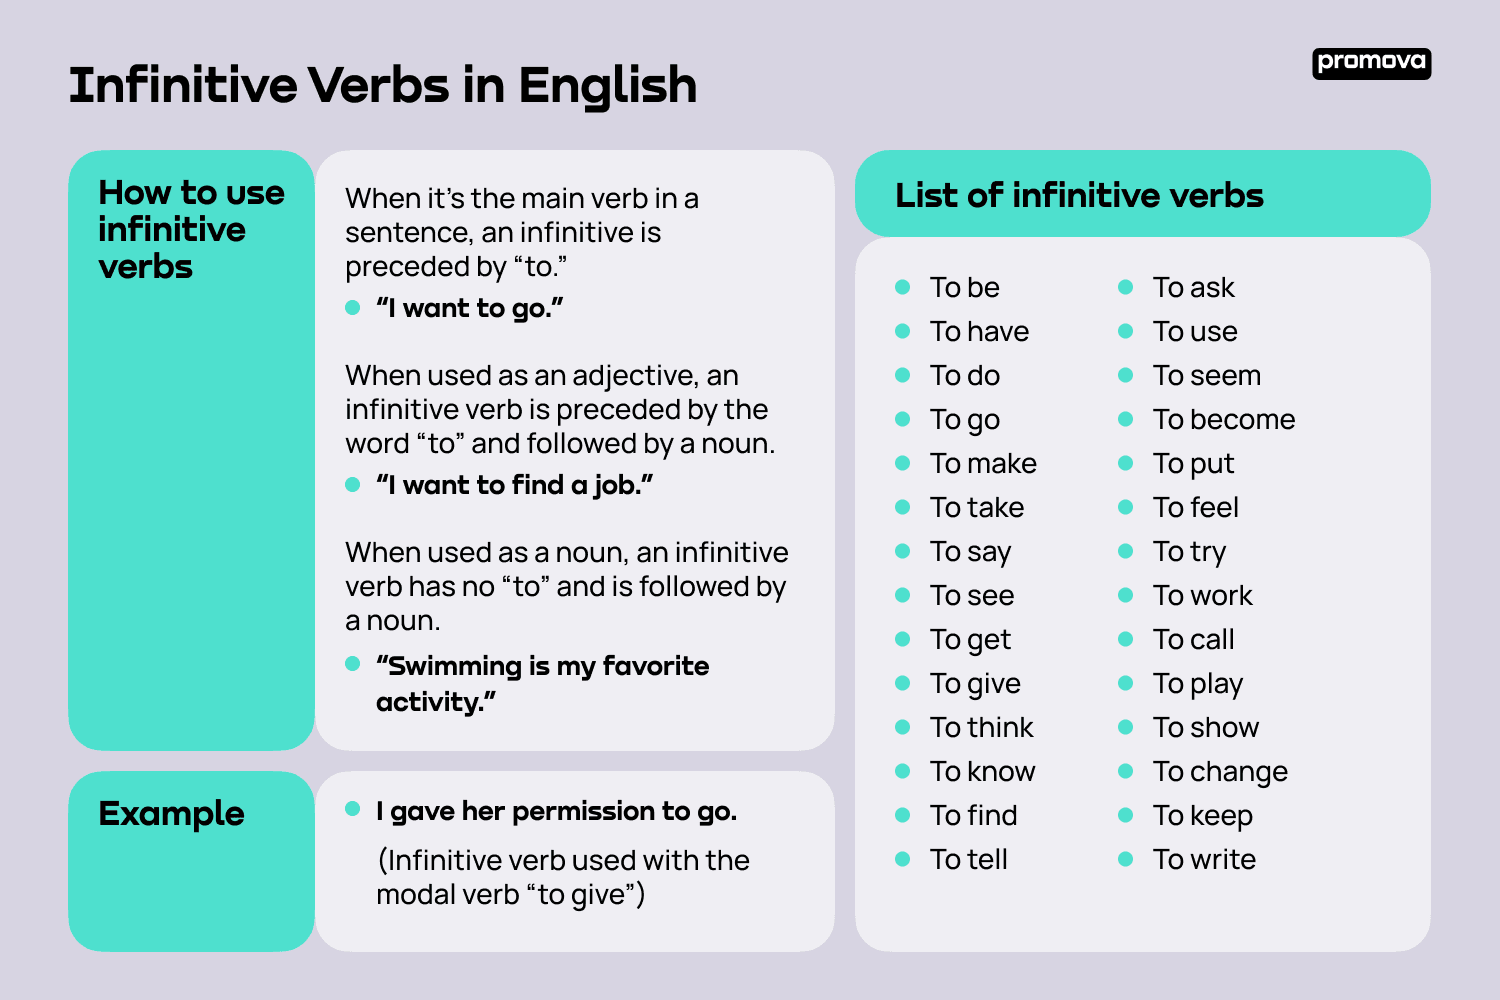 Infinitive Verbs in English